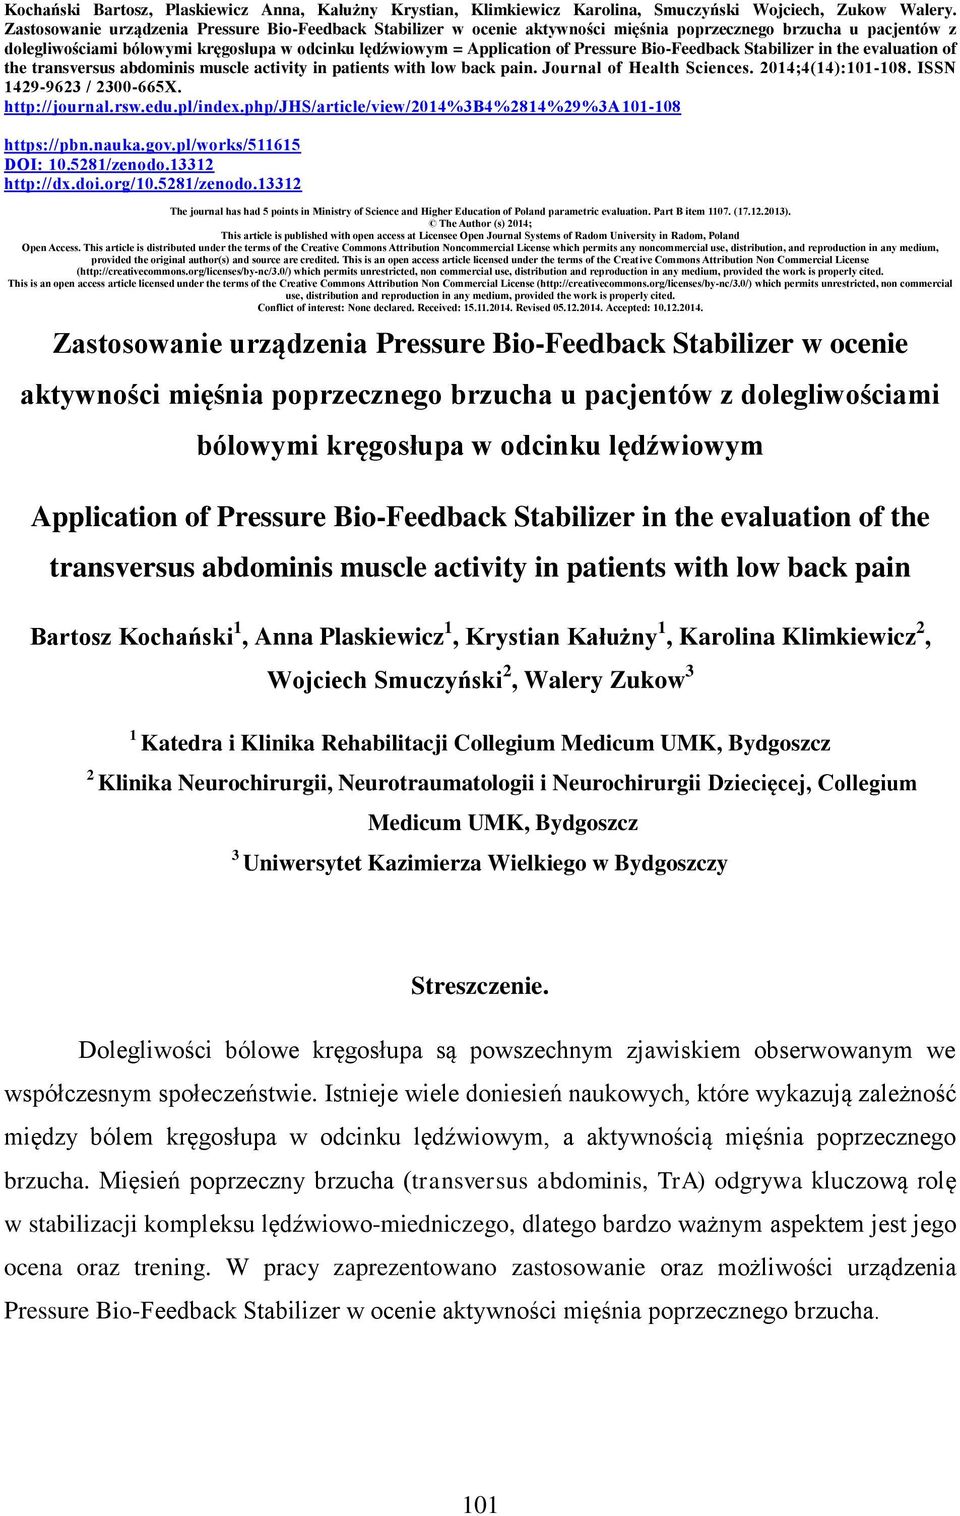 Pressure Bio-Feedback Stabilizer in the evaluation of the transversus abdominis muscle activity in patients with low back pain. Journal of Health Sciences. 2014;4(14):101-108.